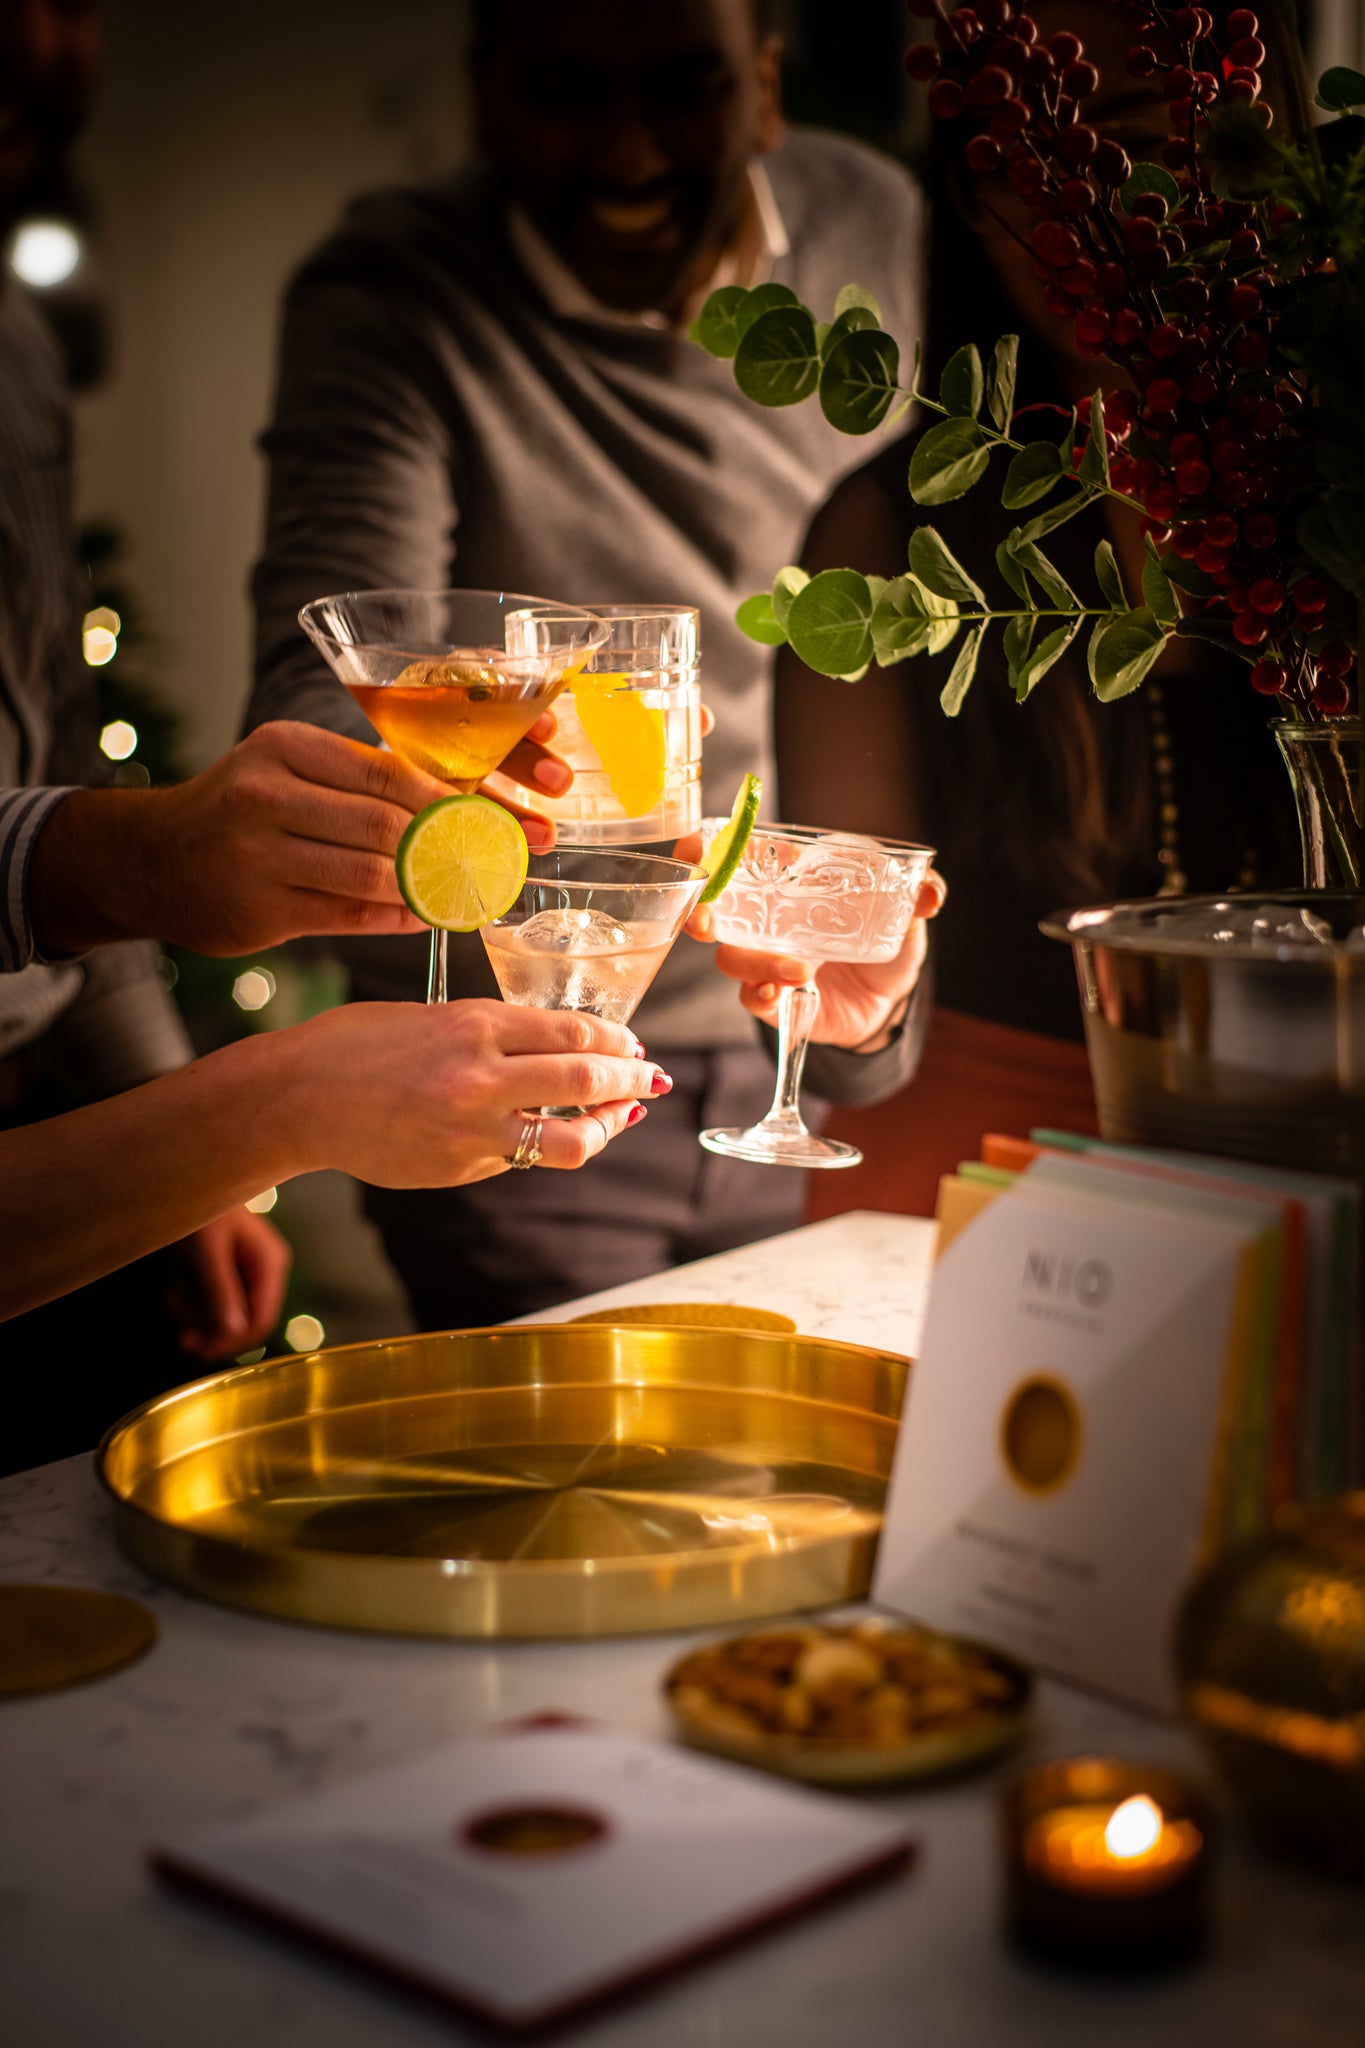  NIO Cocktails has prepared the perfect Box for your aperitifs to delight family and friends this Thanksgiving Holiday! Below is our selection of 9 aperitif cocktails